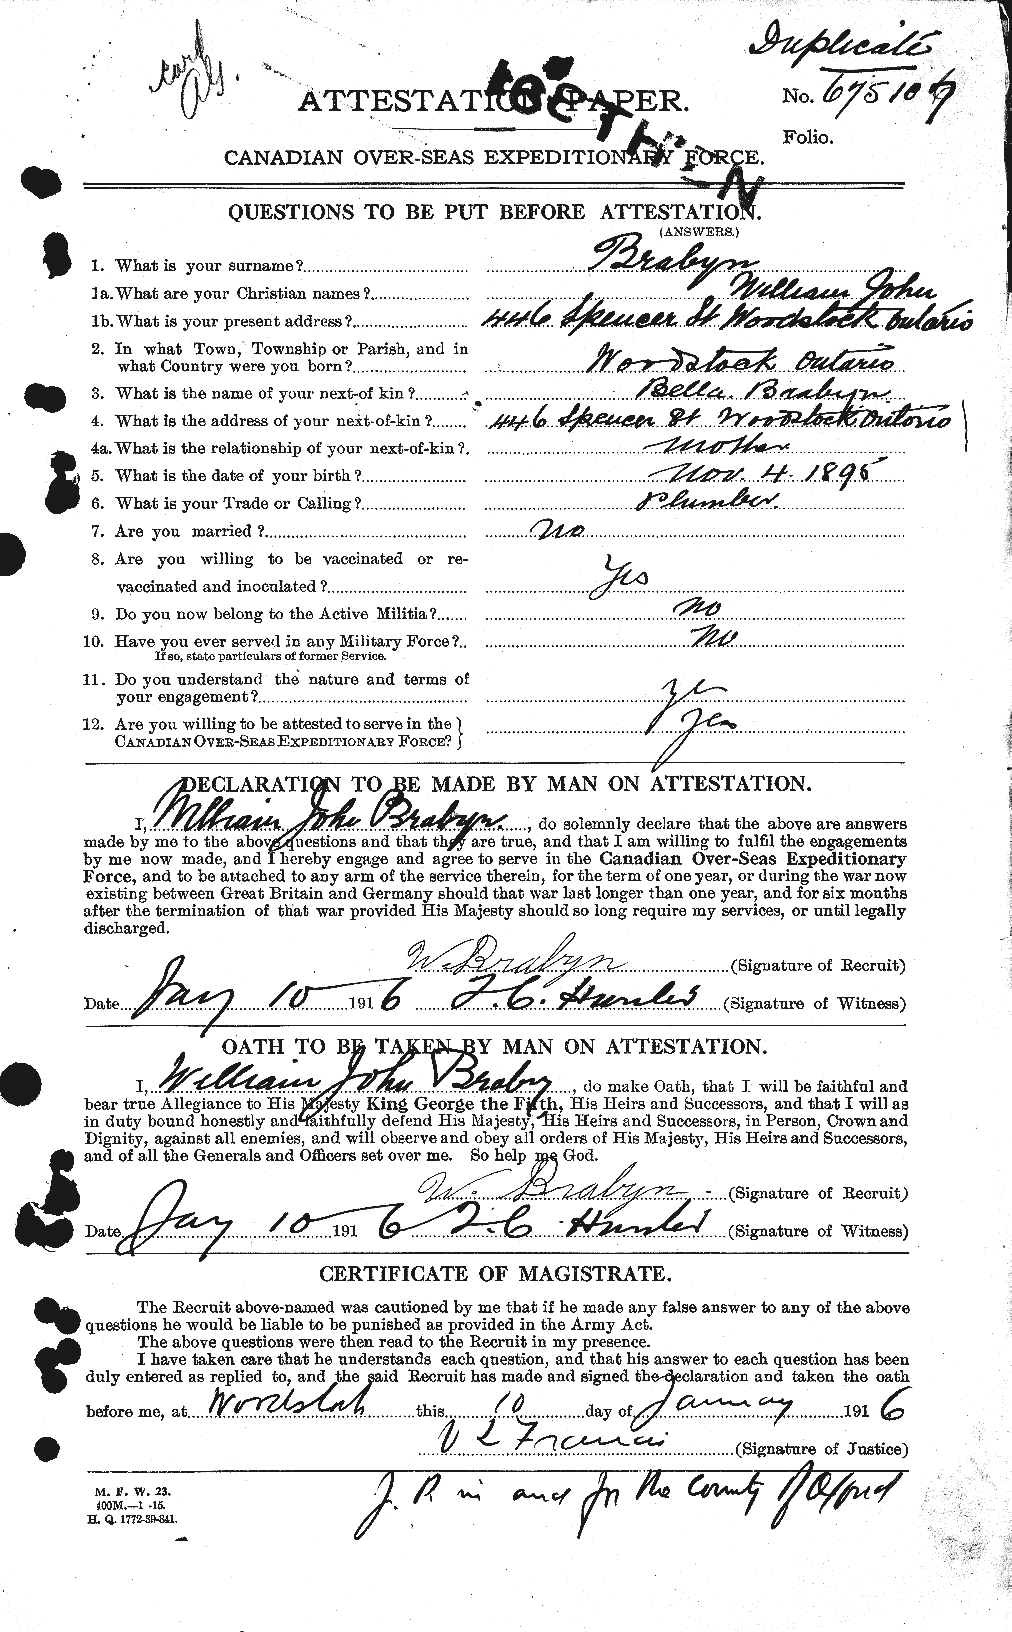 Personnel Records of the First World War - CEF 254639a